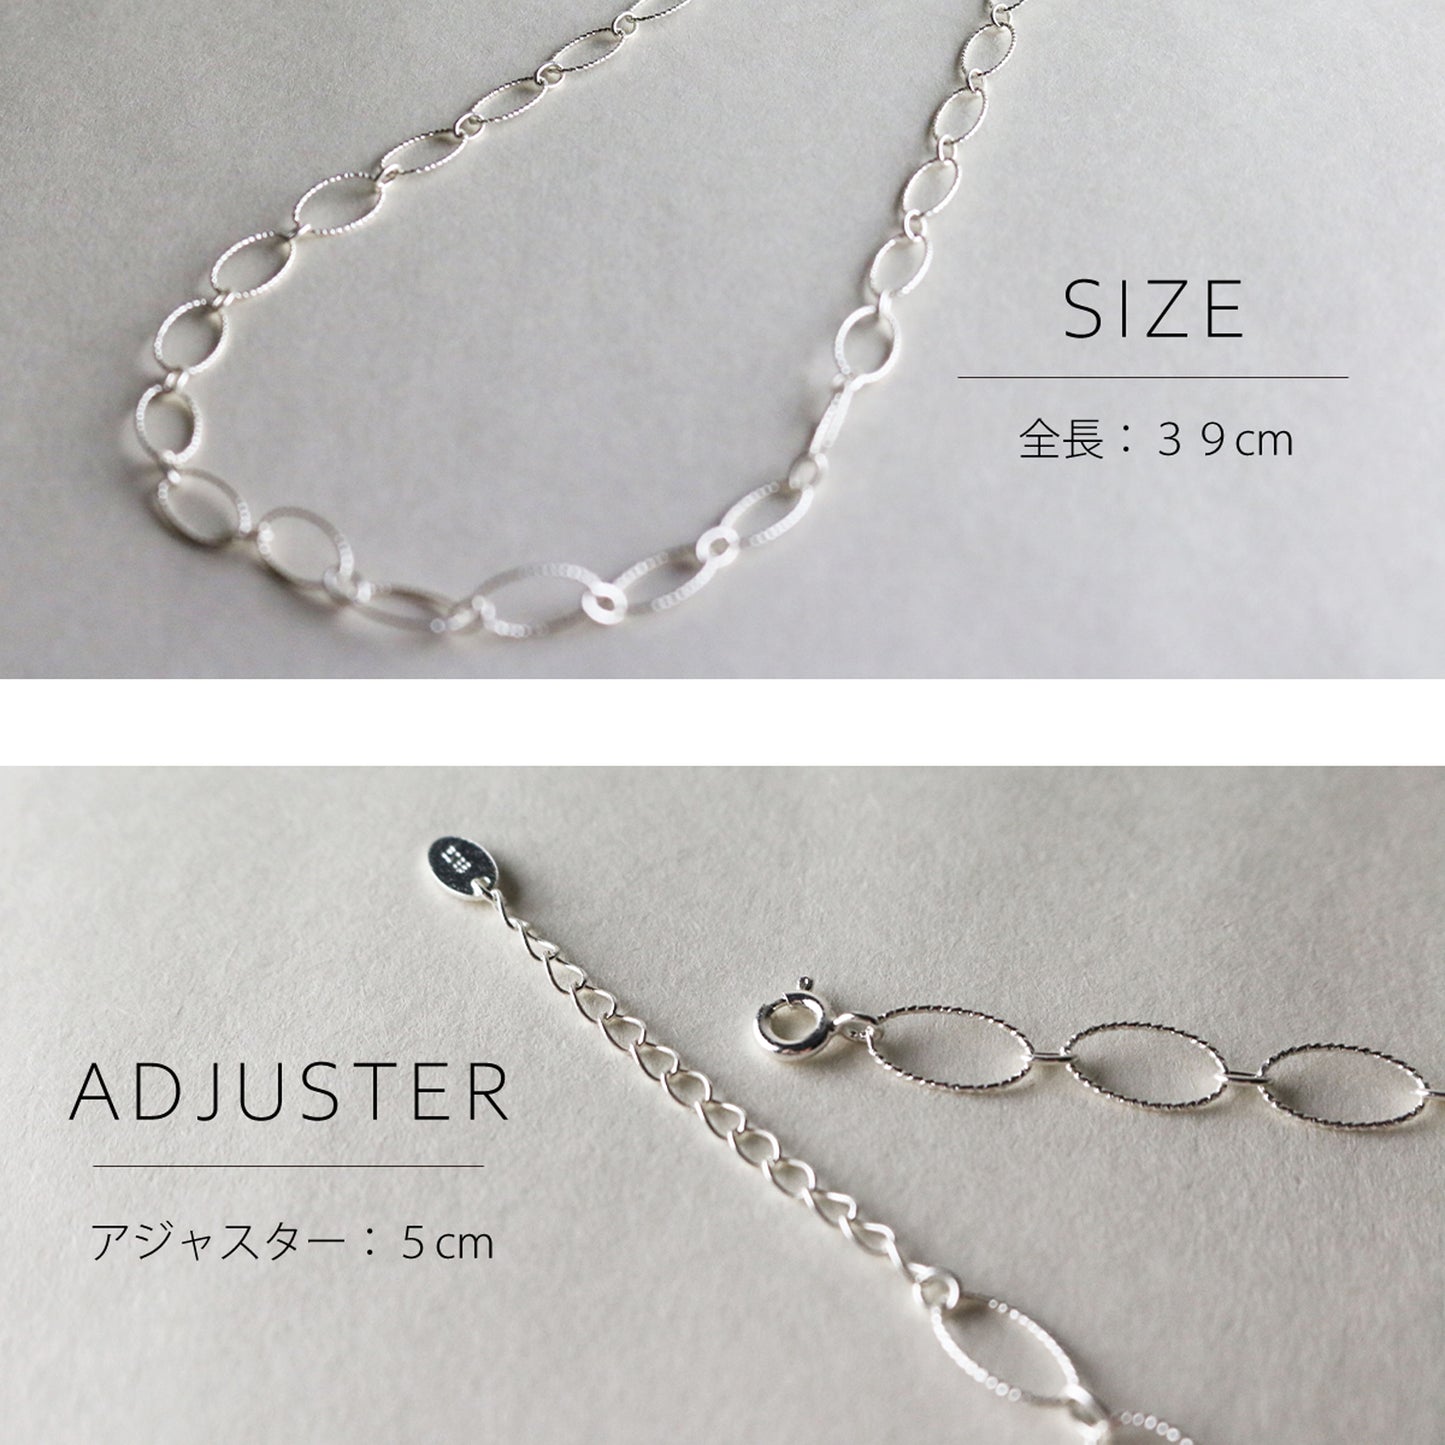 Silver 925 Chain Necklace